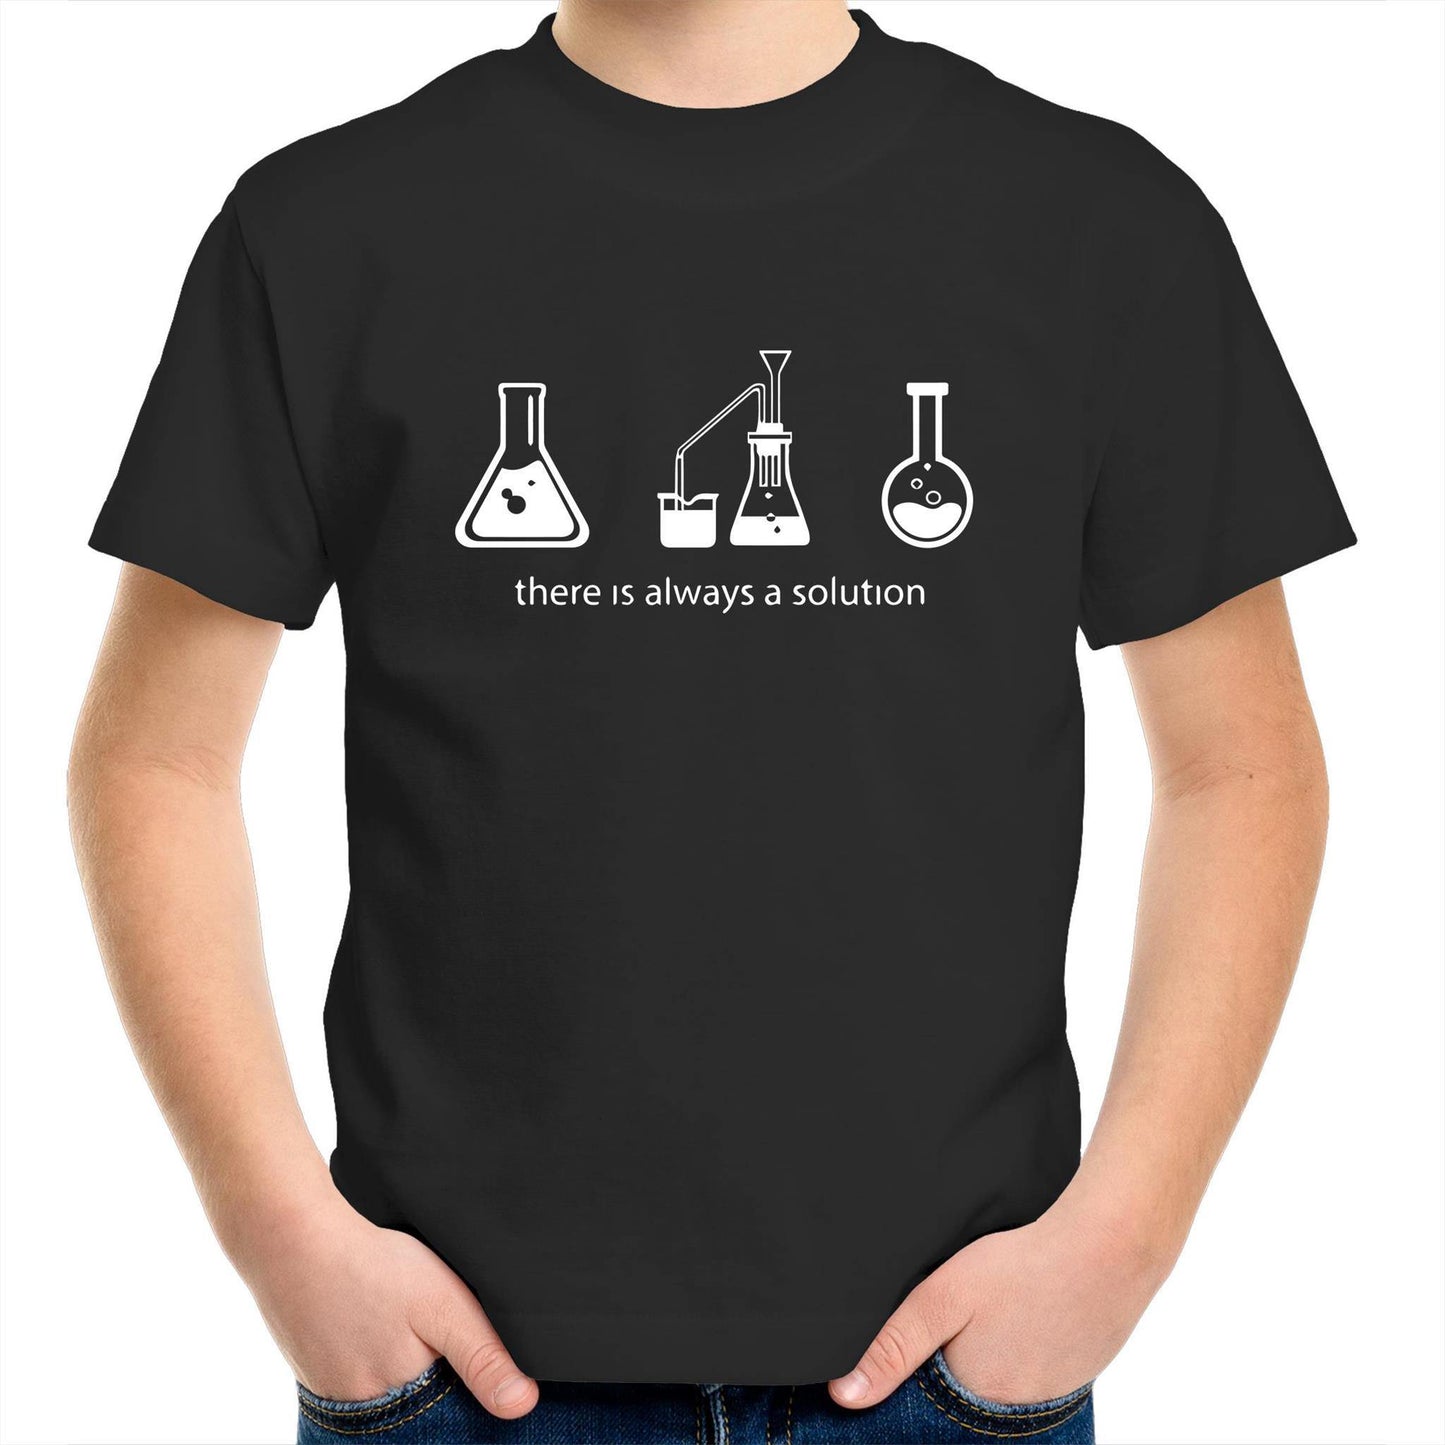 There Is Always A Solution - Kids Youth Crew T-Shirt Black Kids Youth T-shirt Science